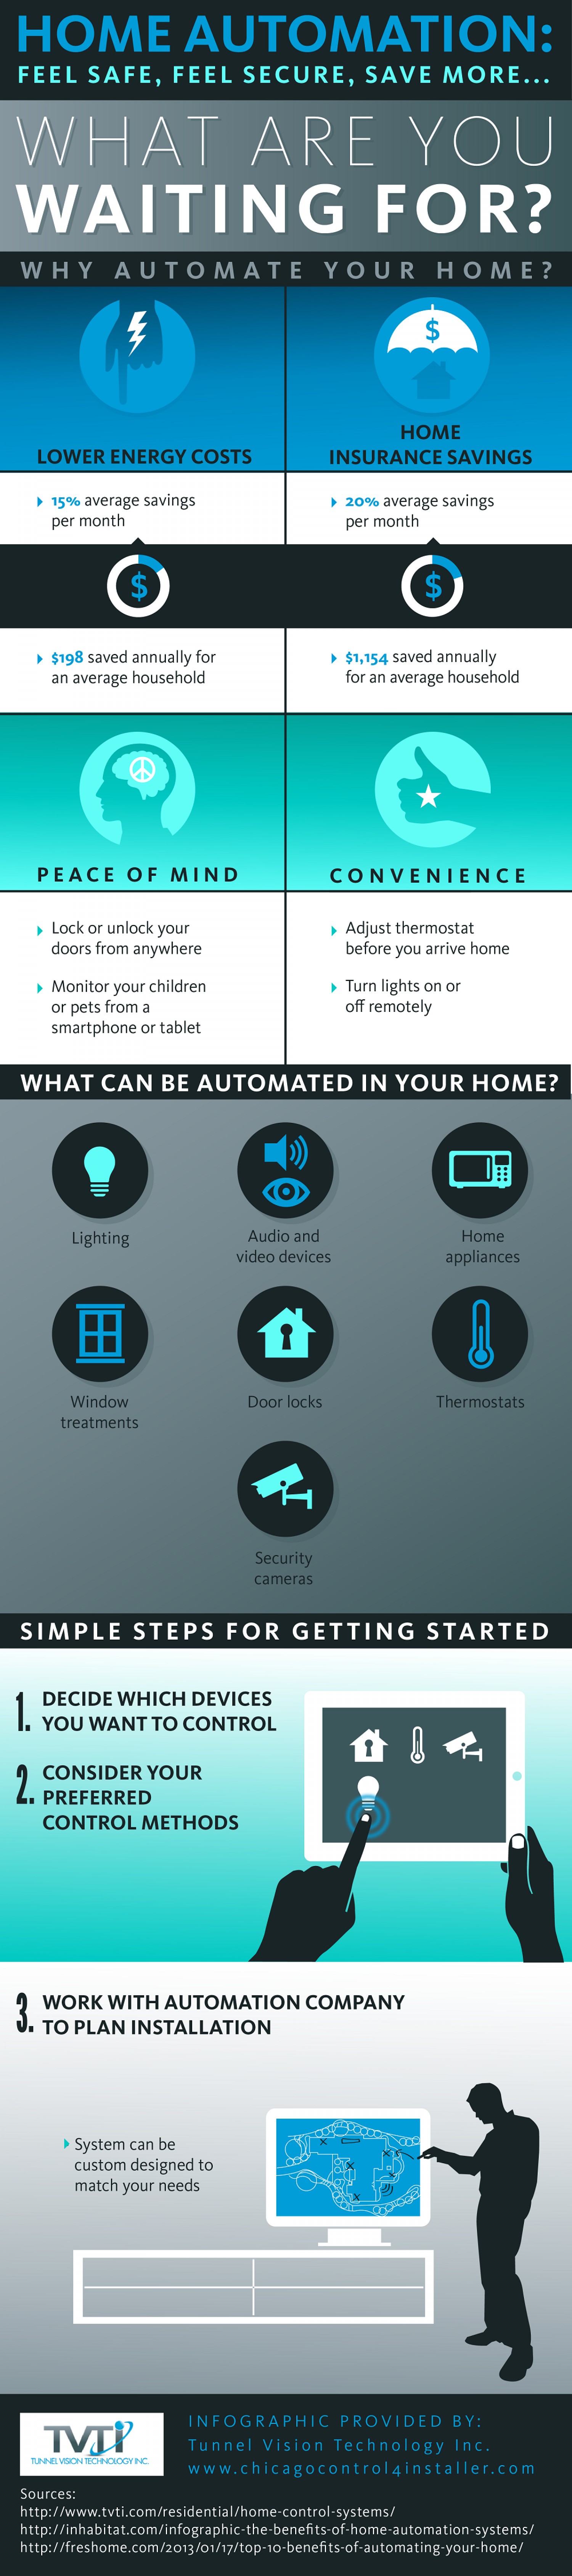 home-automation-fell-safe-feel-secure